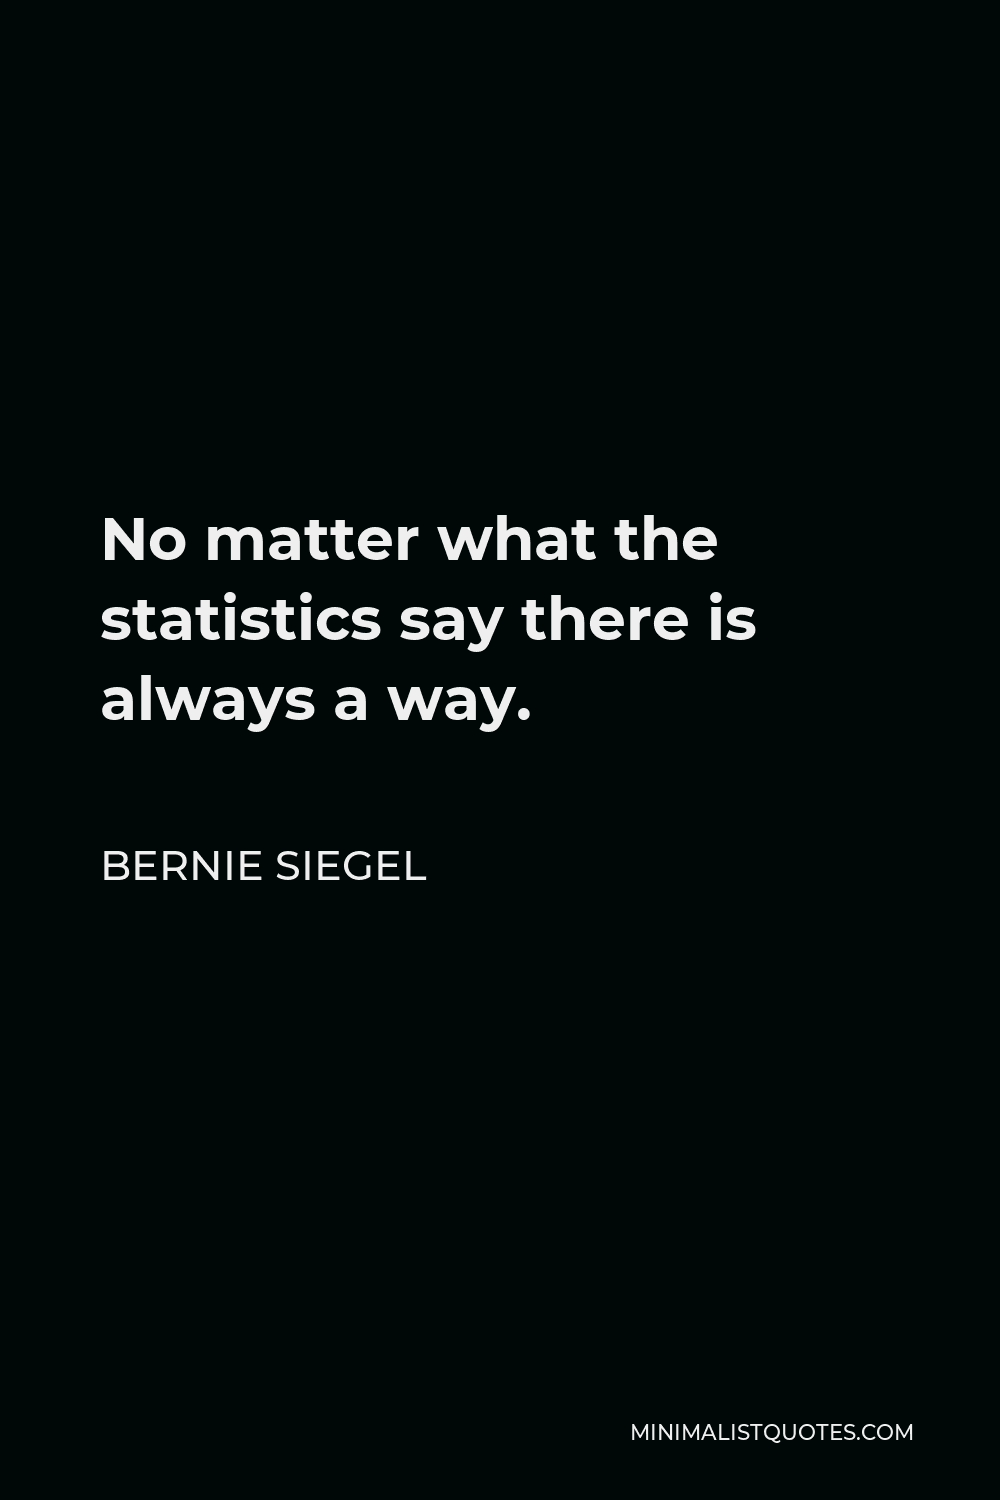 Bernie Siegel Quote - No matter what the statistics say there is always a way.